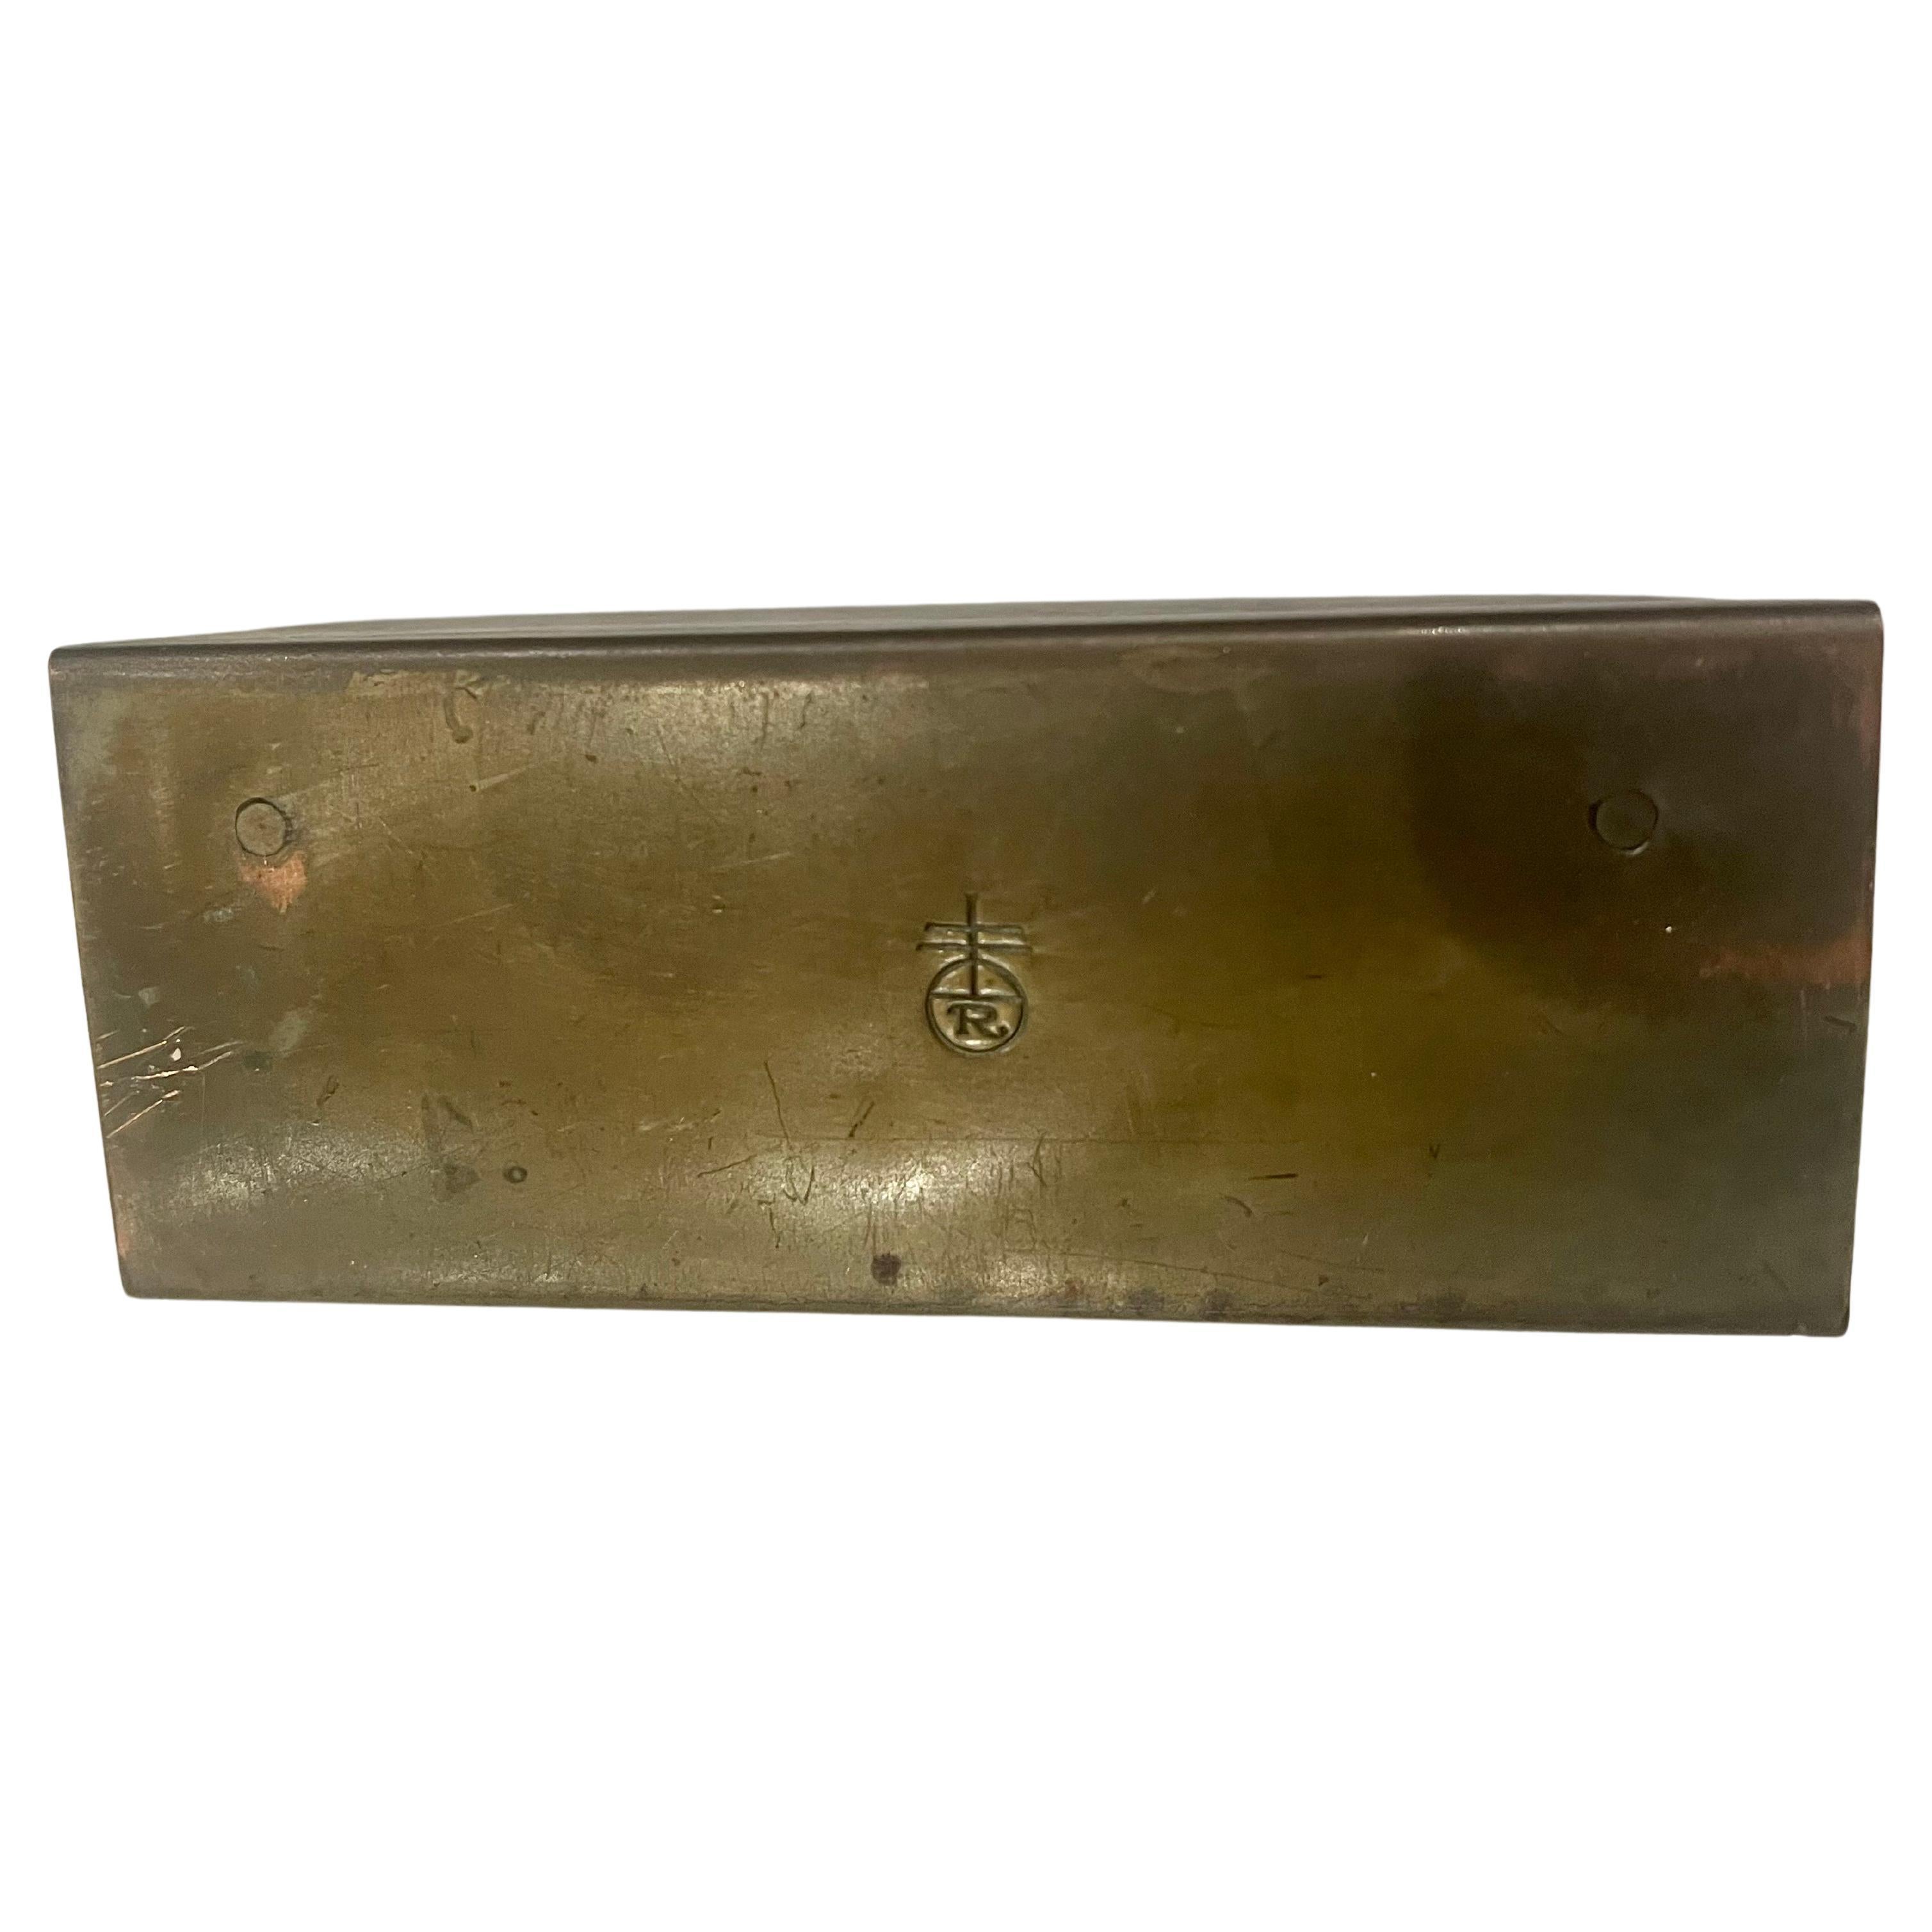 Arts & Crafts Roycroft Hammered Copper Desk Top Envelope Holder Early Mark In Good Condition For Sale In San Diego, CA